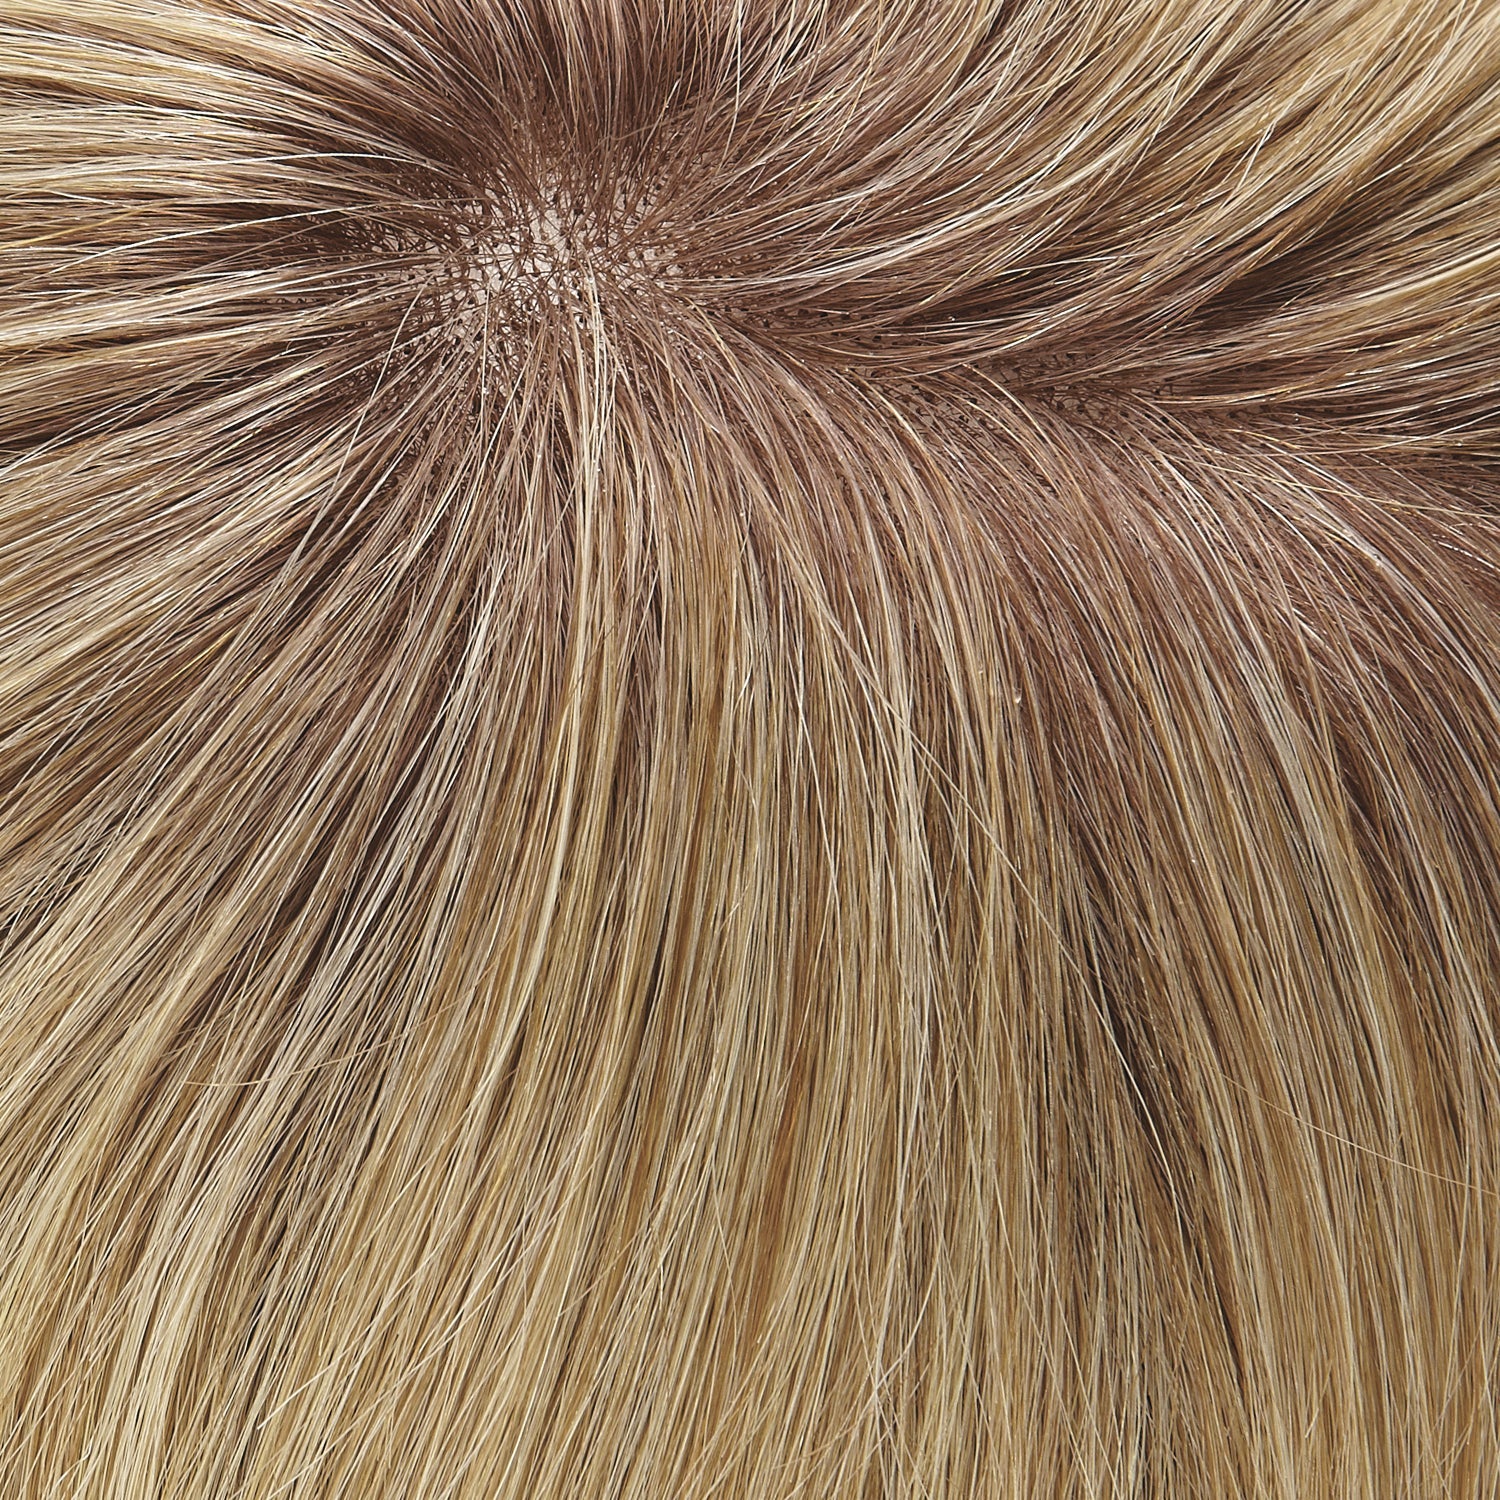 27T613S8 medium natural red golden blonde & pale natural gold blonde blend & tipped rooted medium brown